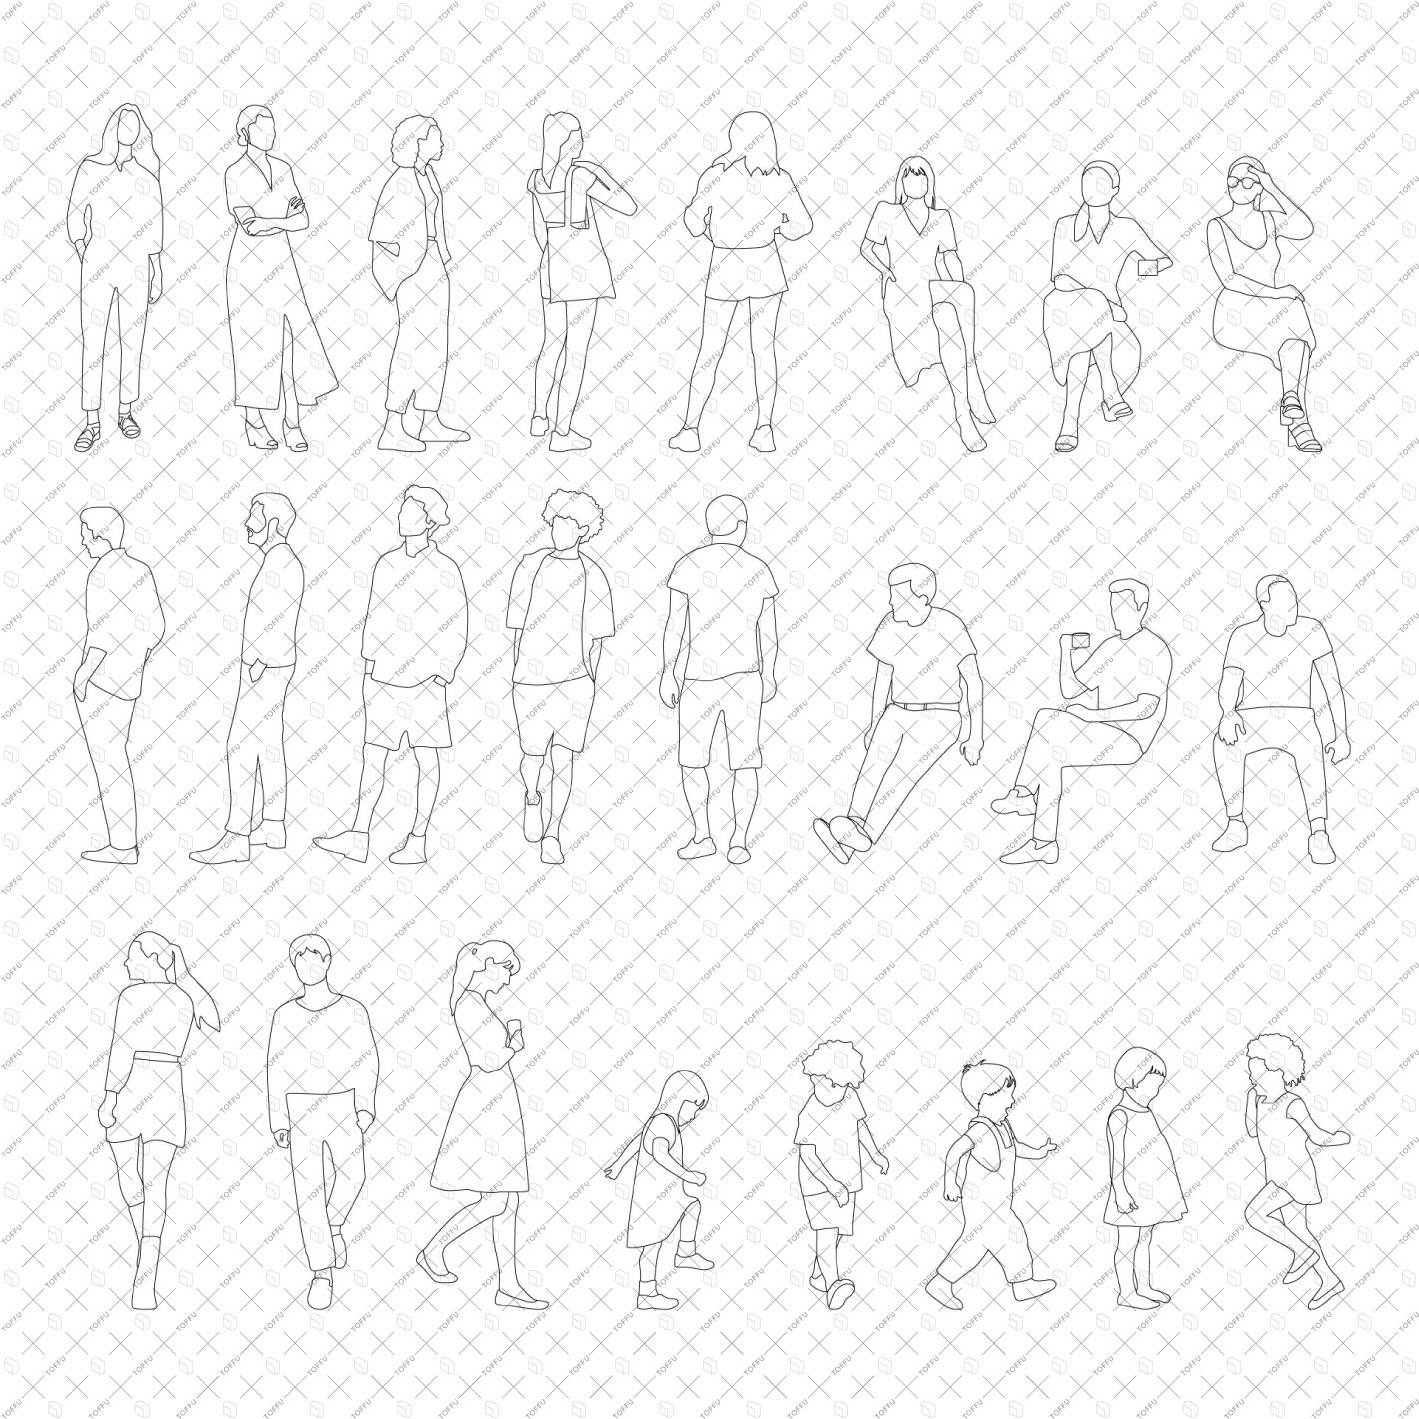 Cad Standing and Sitting People (24 Figures) DWG | Toffu Co